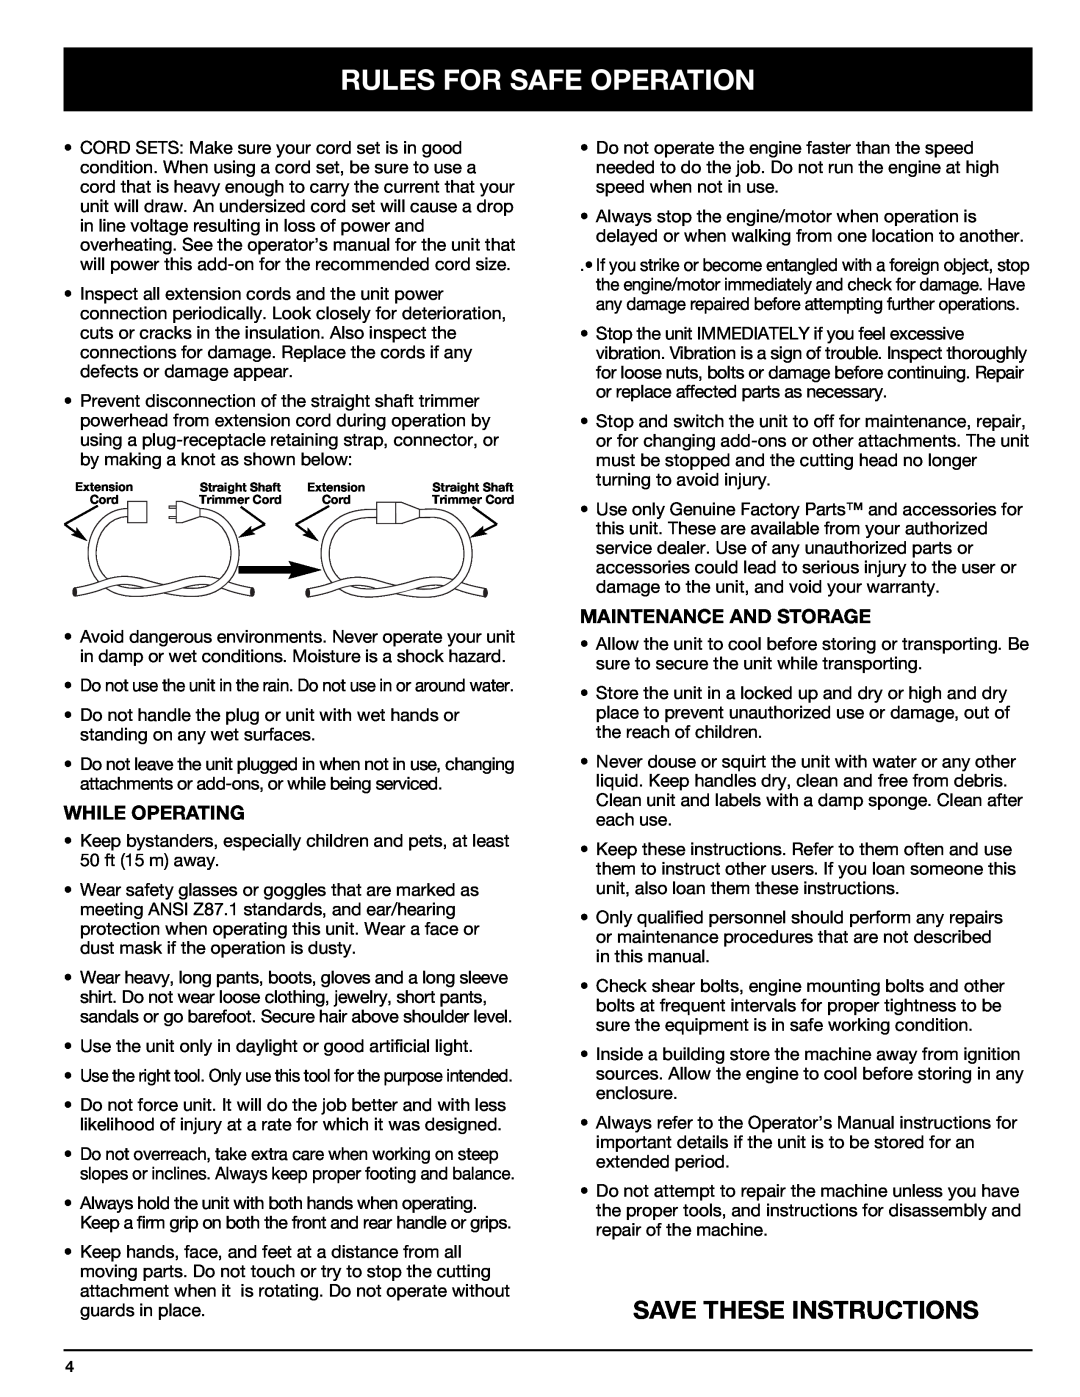 Troy-Bilt 769-00425A manual Save These Instructions, While Operating, Maintenance And Storage, Rules For Safe Operation 